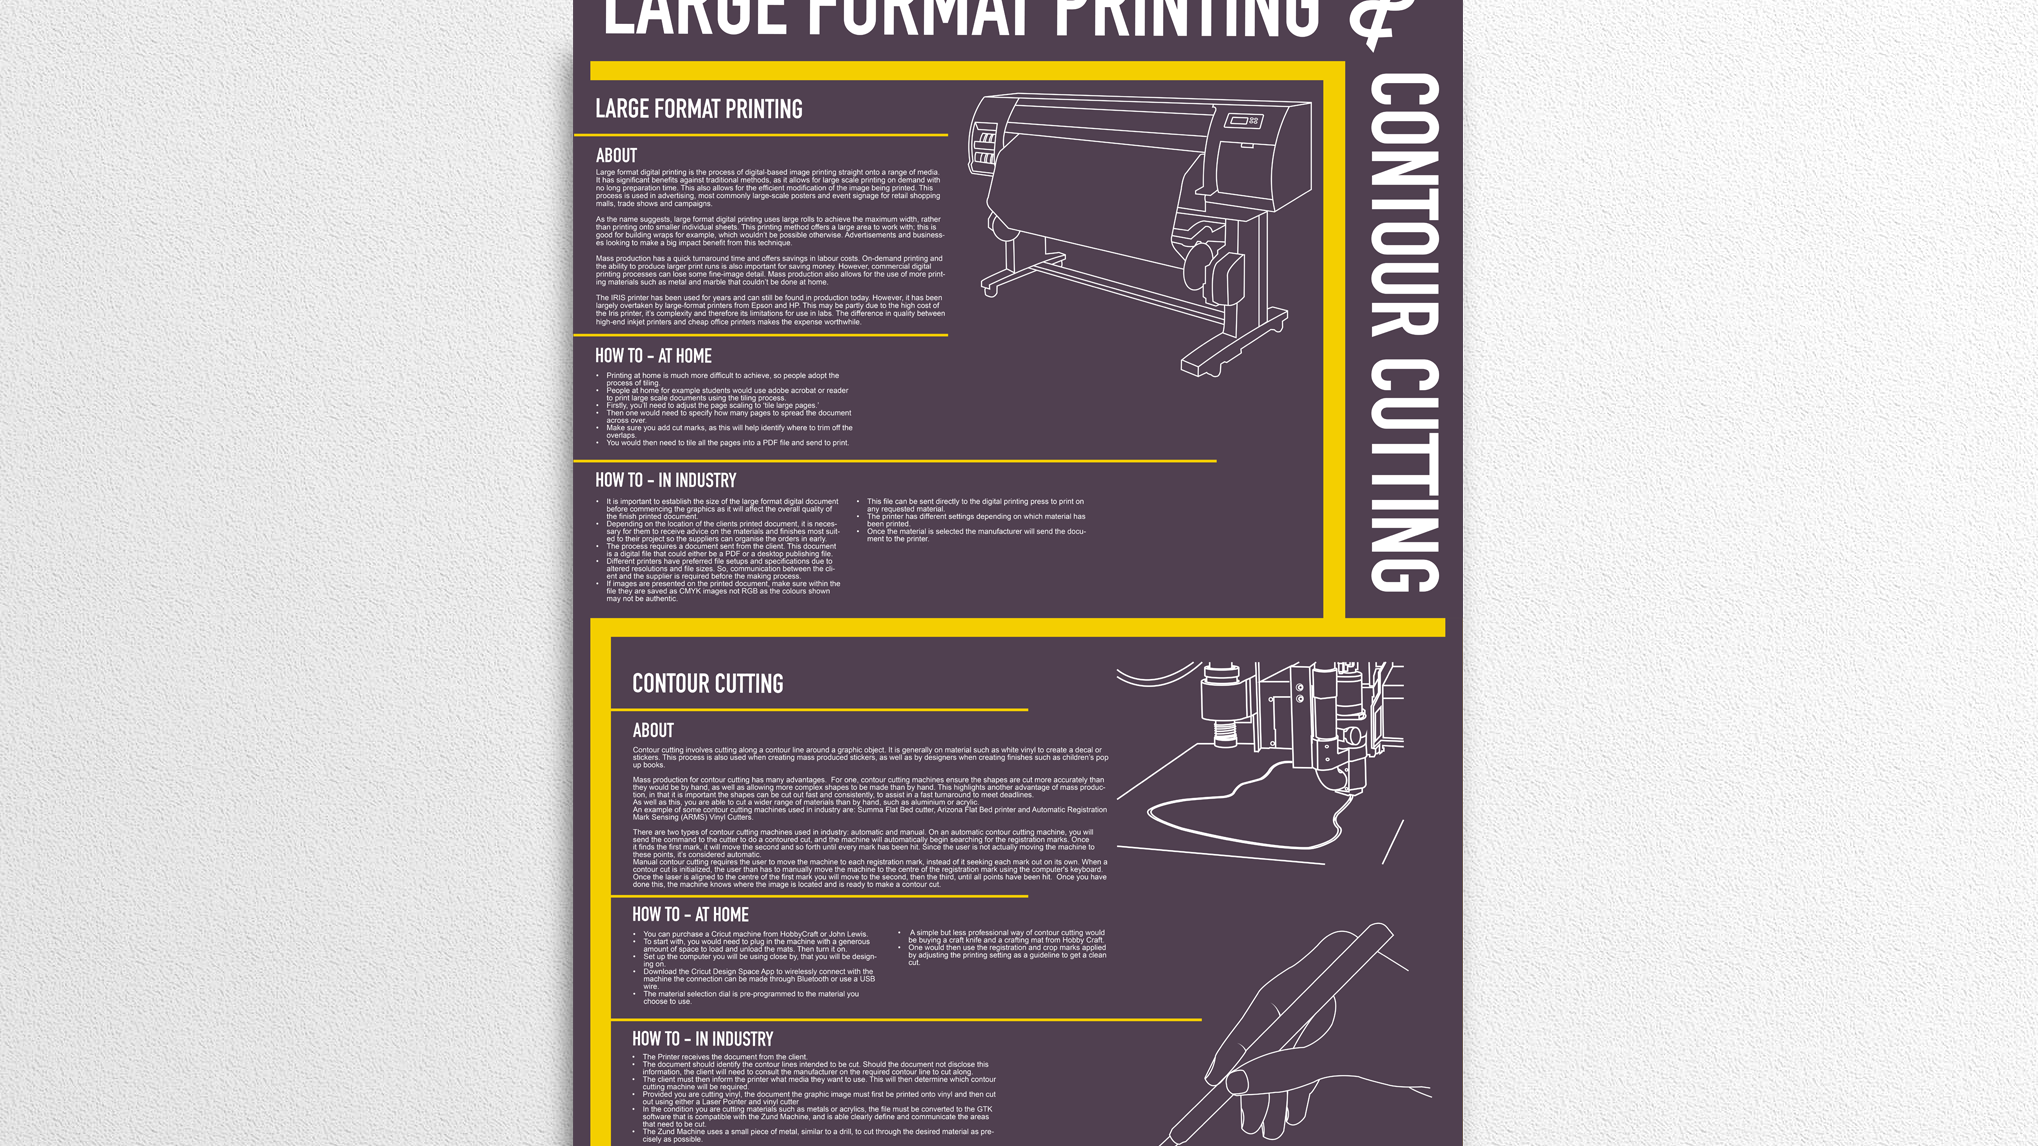 poppy carver - Large Format Digital Printing & Contour Cutting Poster